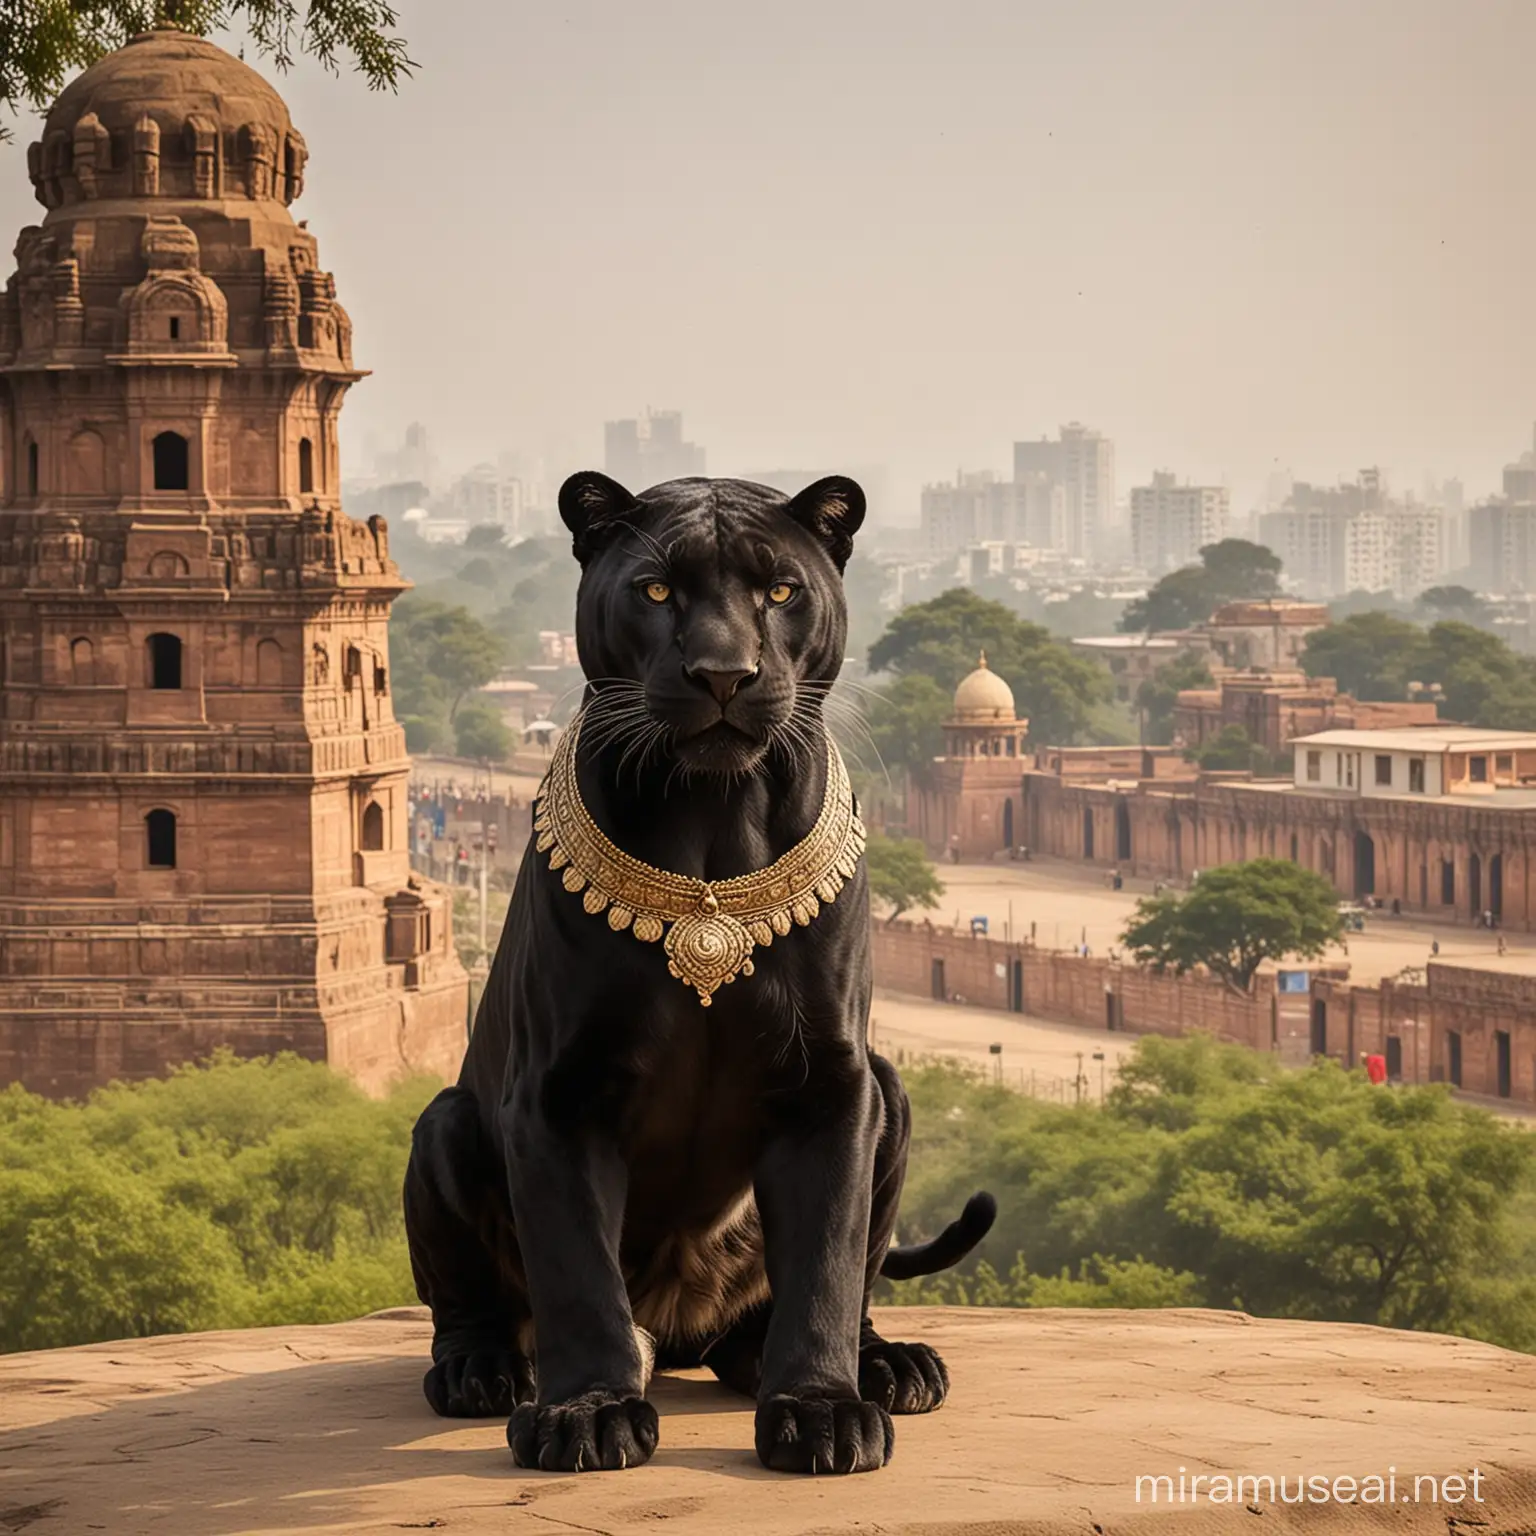 Create a mascot with combination of nature and Delhi heritage sites but make use panther as a mascot and make it cute mascot 
Ad add heritage sites of Delhi in background 
